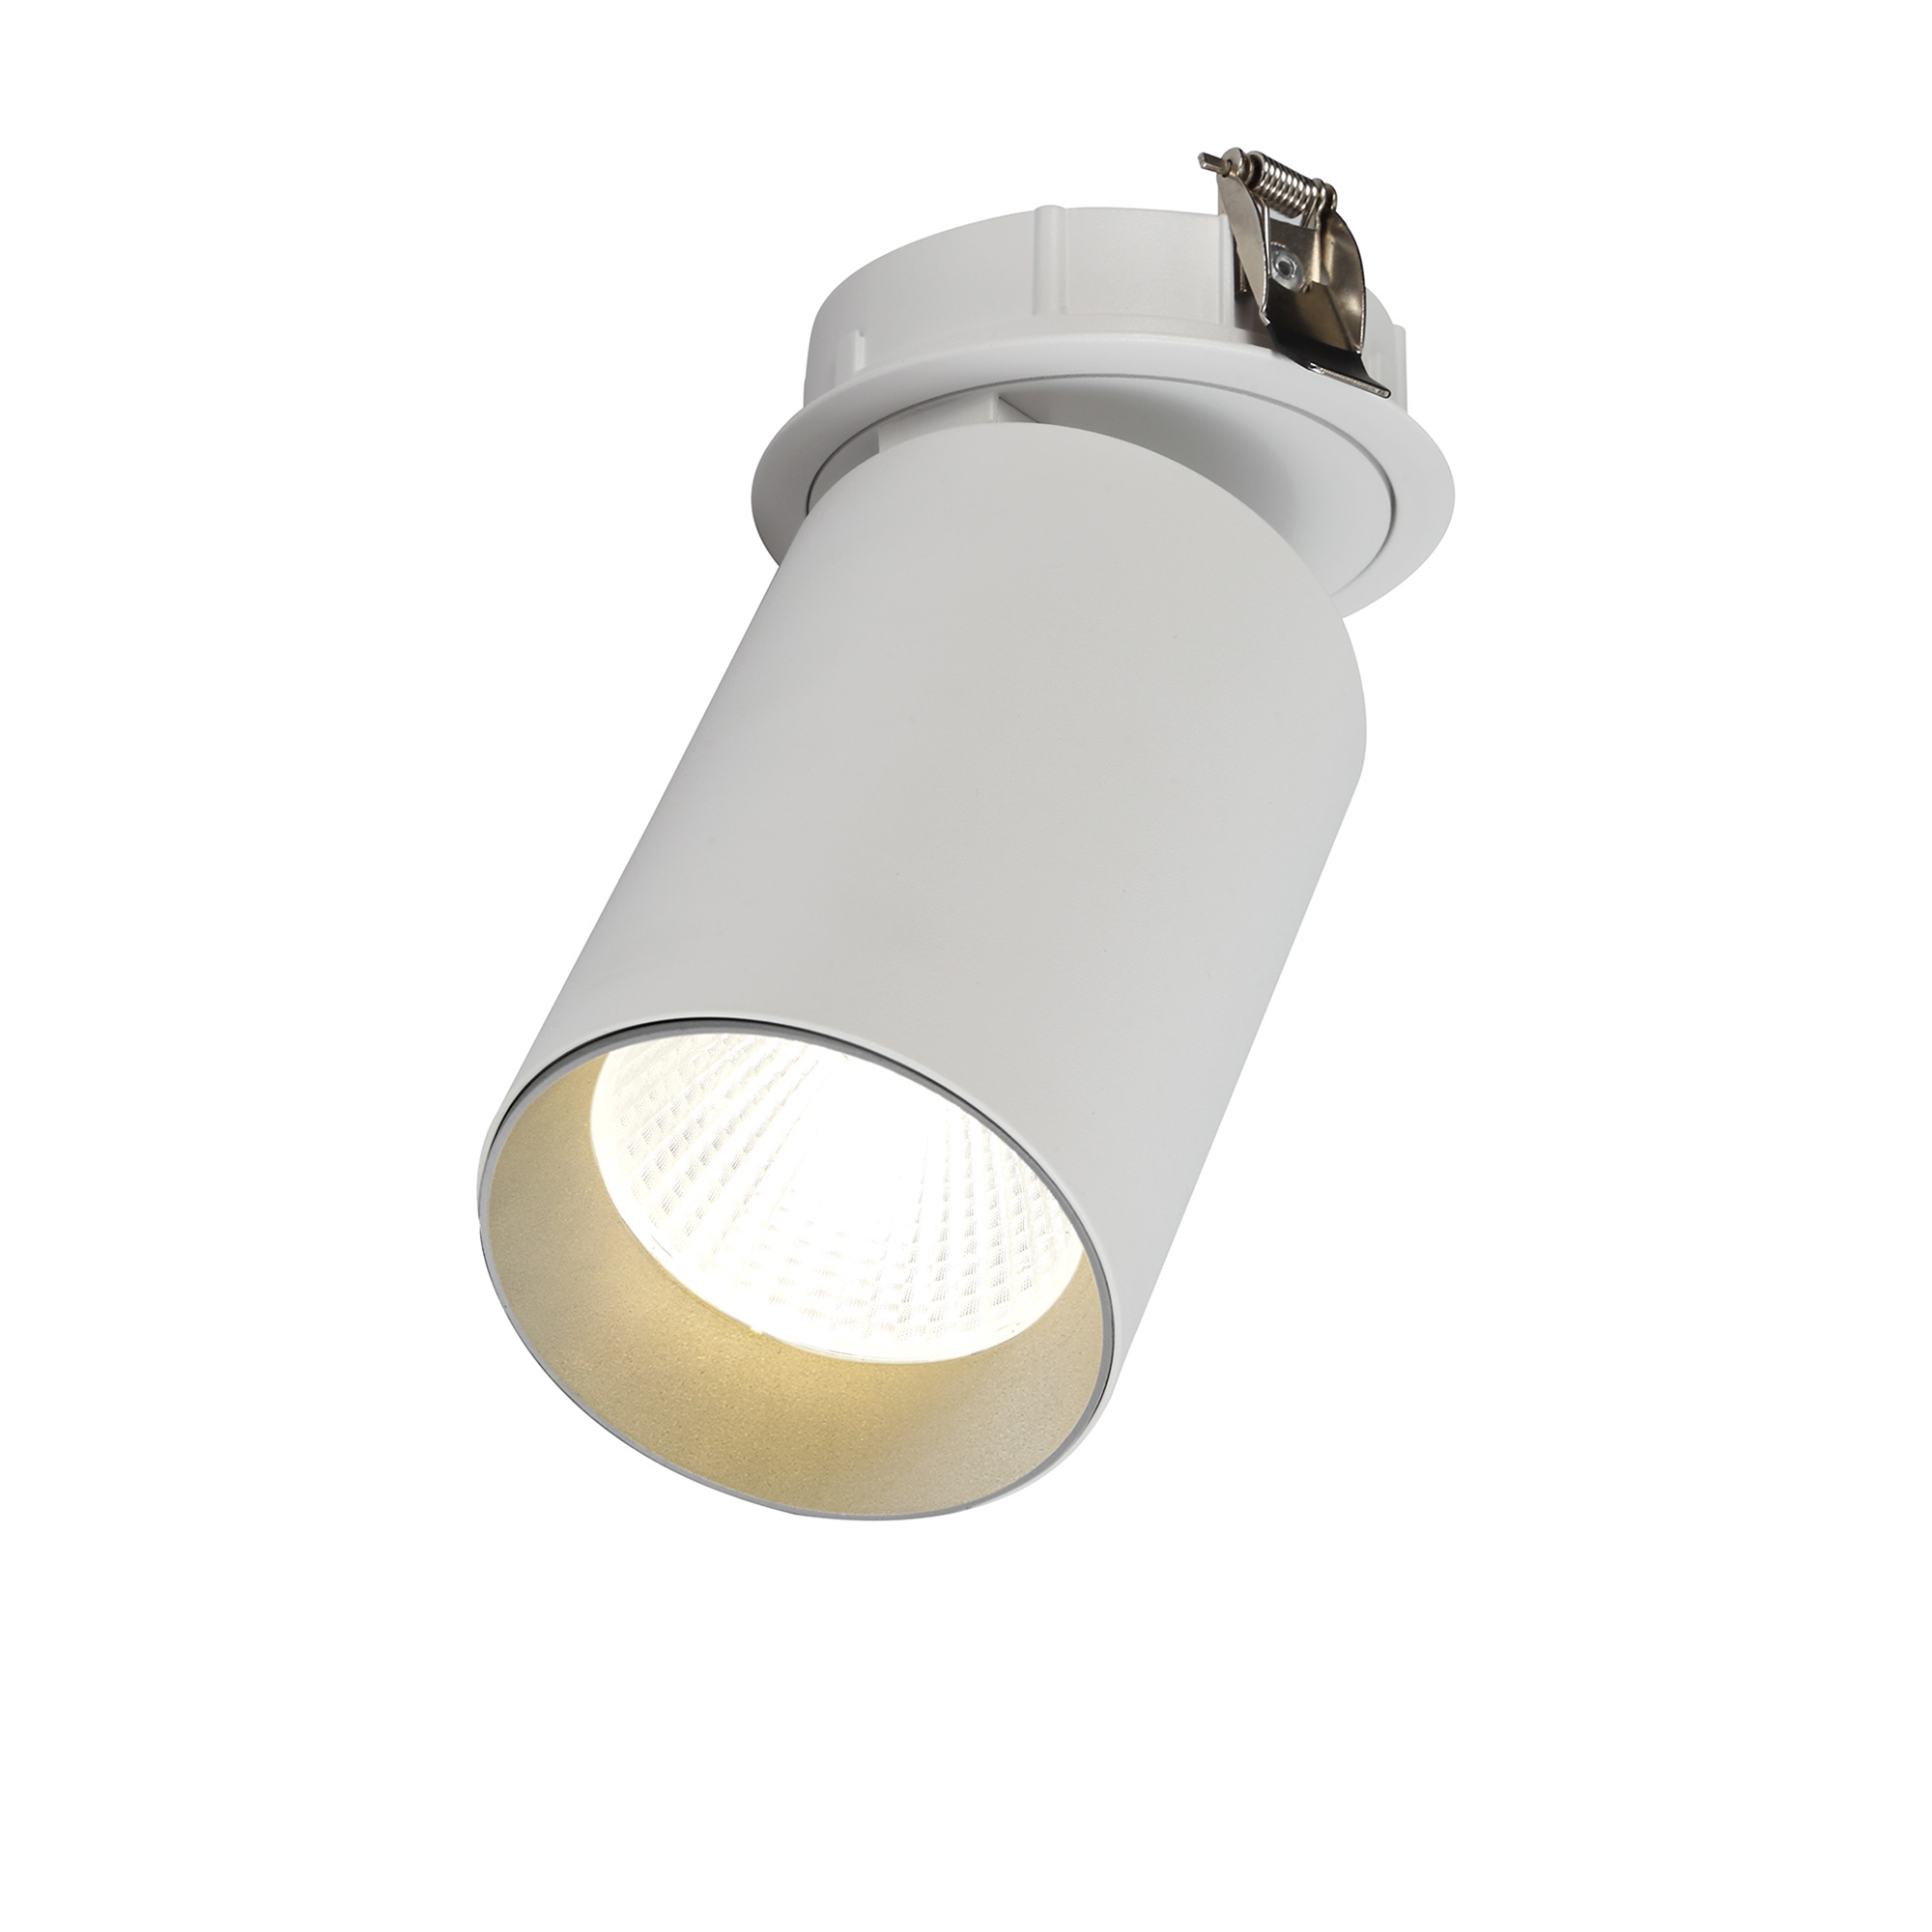 DX170009  Eos A 20, White & Silver, Recessed Base LED Spotlight, C/W 20W 450mA Driver, WITHOUT LED Engine, IP20, 5yrs Warranty